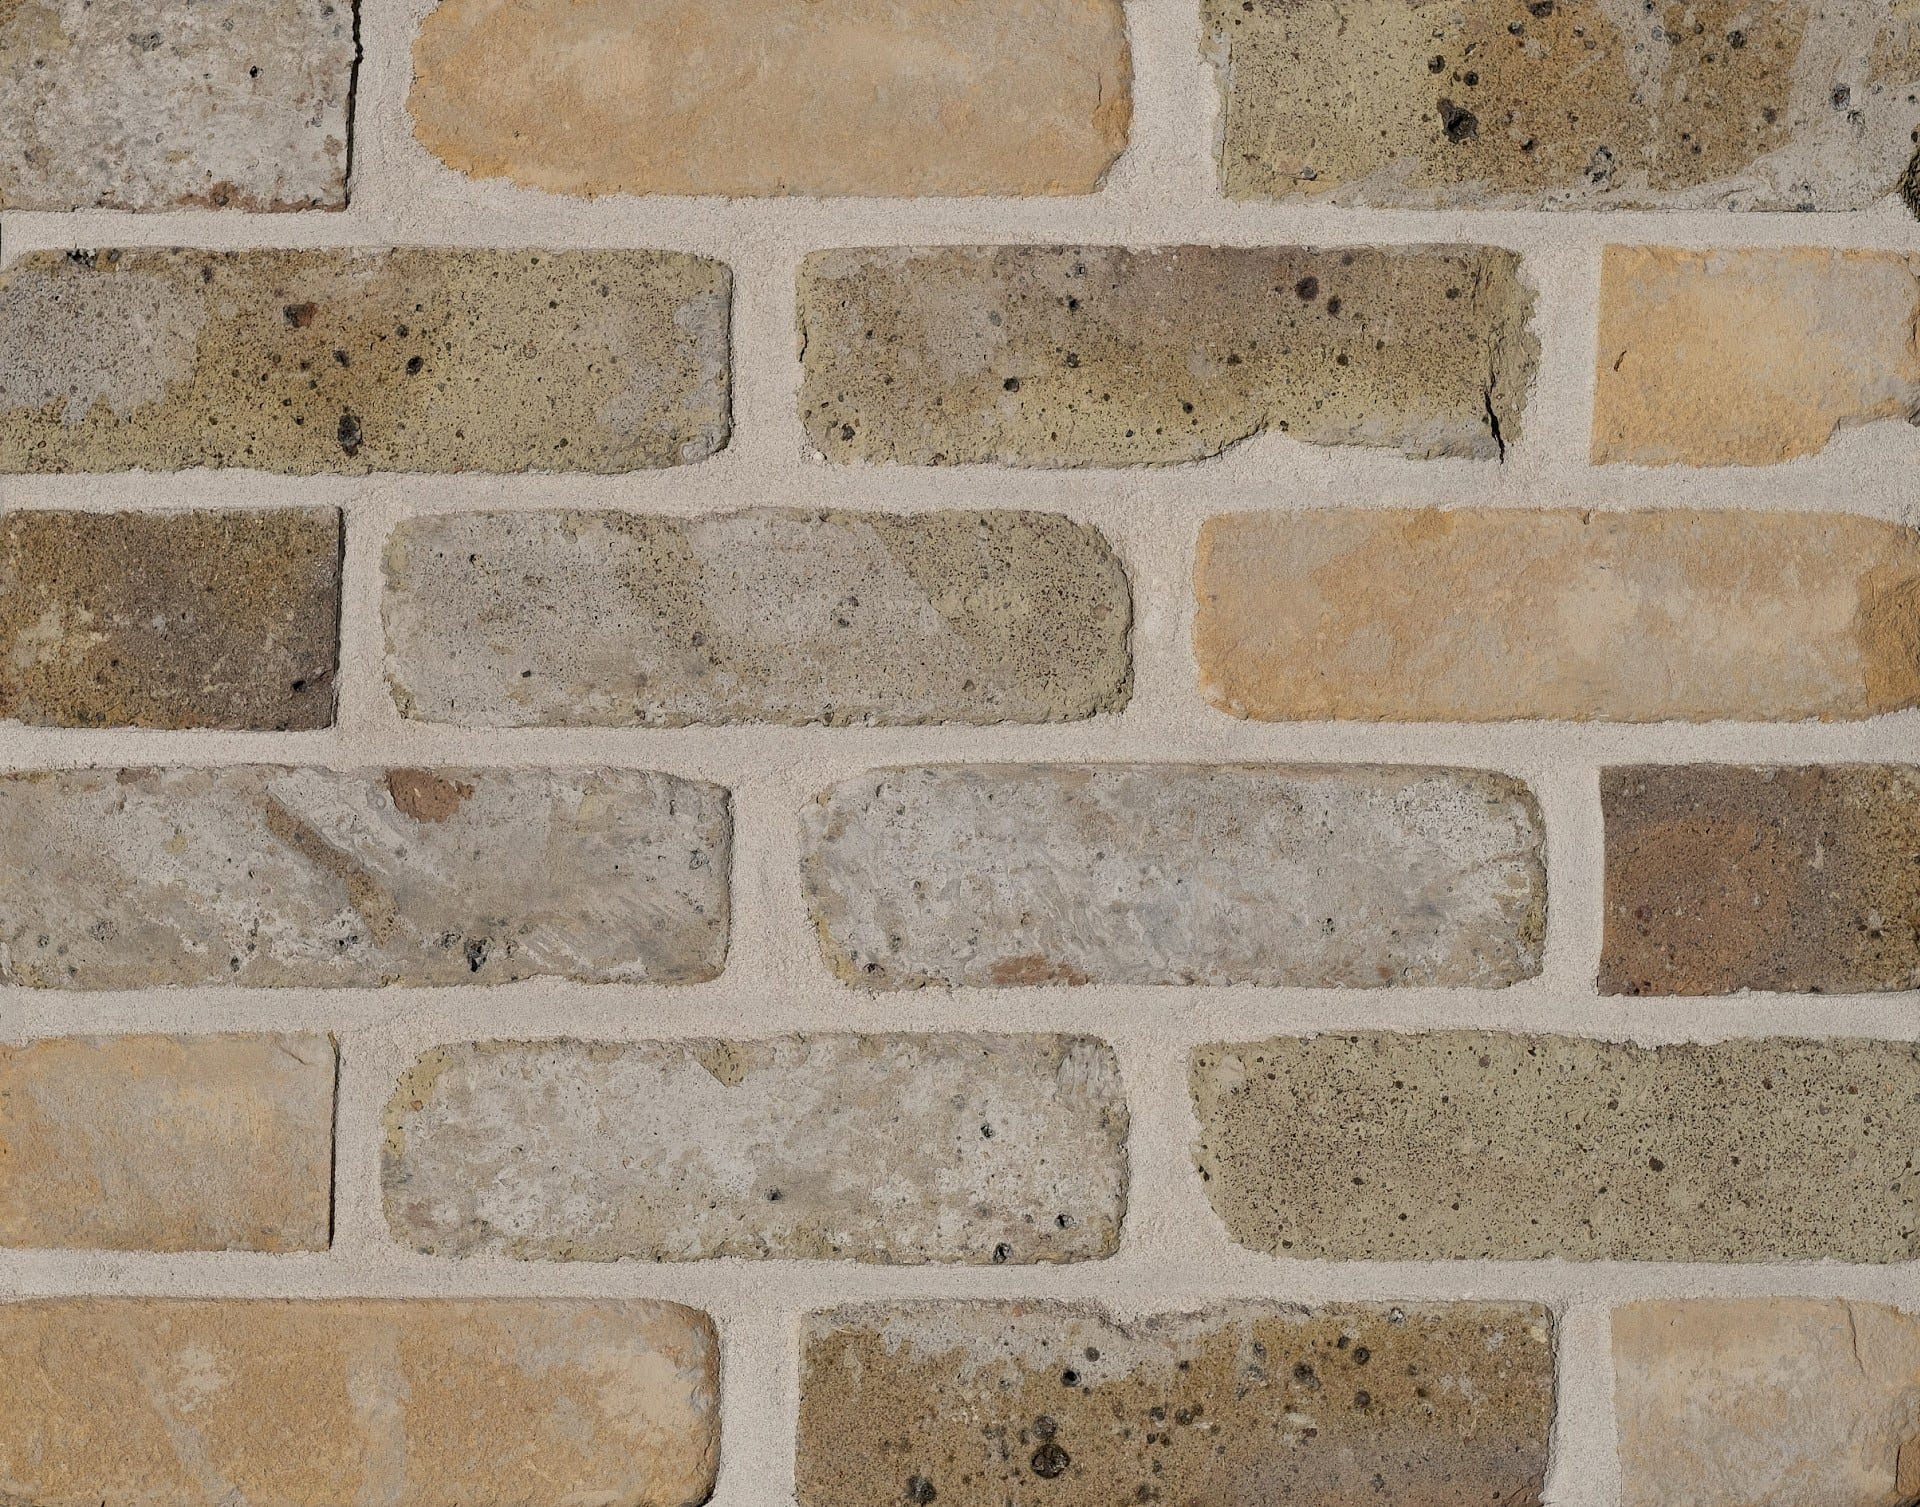 A photo of the Camtech Rustica Poplar Yellow Mixture brick in use.